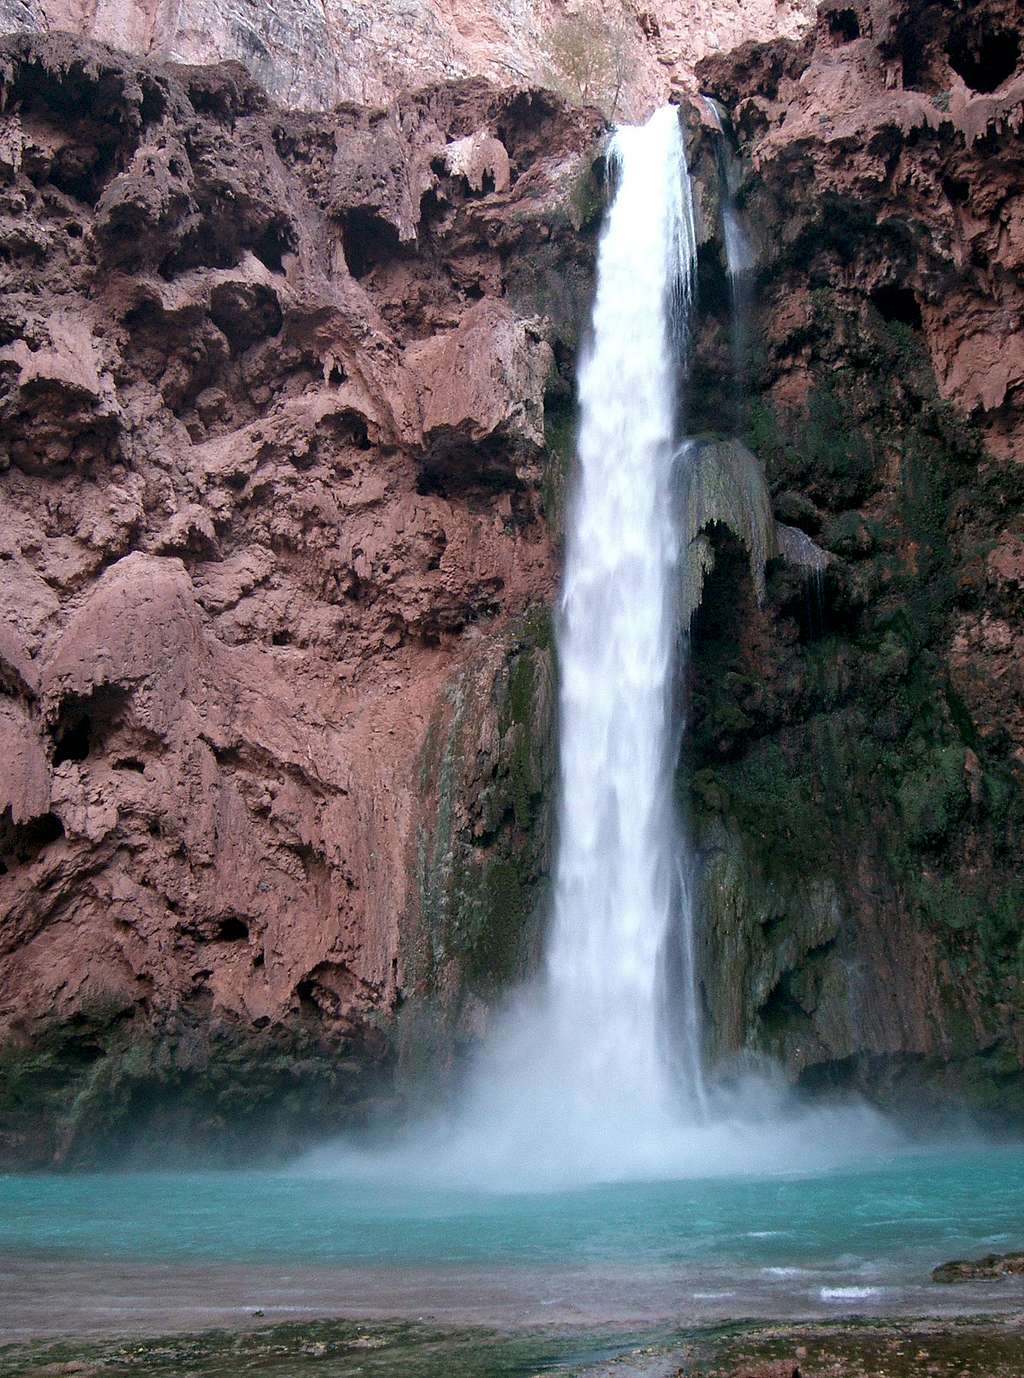 From the Bottom of Mooney Falls